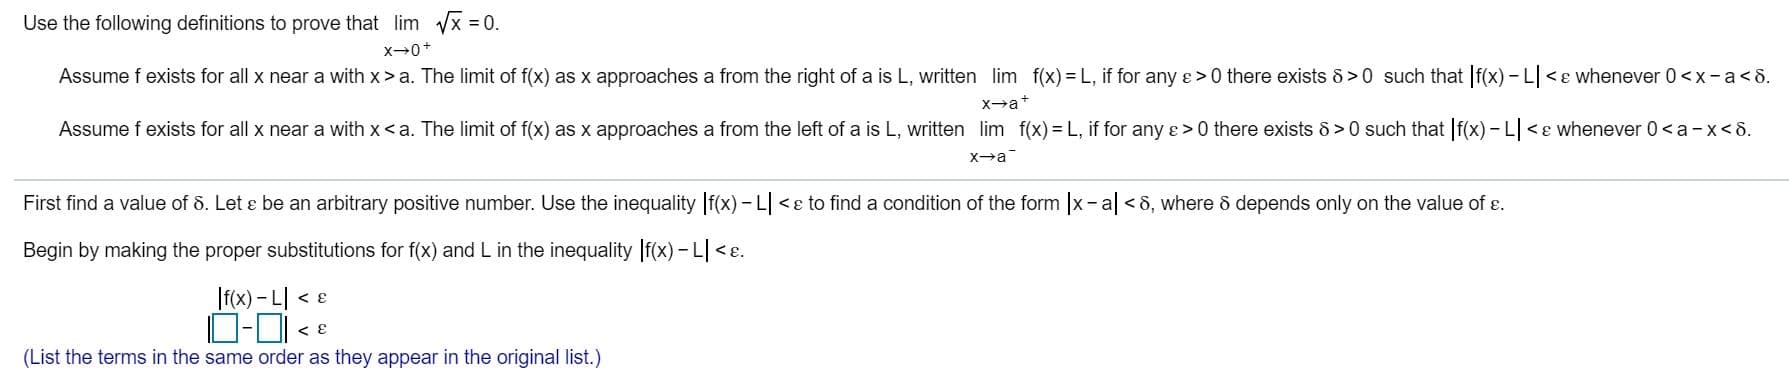 Use the following definitions to prove that lim x 0
x0+
Assume f exists for all x near a with x > a. The limit of f(x) as x approaches a from the right of a is L, written lim f(x) L, if for any e > 0 there exists 8>0 such that f(x)- L<e whenever 0<x-a < 8
xa
Assume f exists for all x near a with x< a. The limit of f(x) as x approaches a from the left of a is L, written lim f(x)= L, if for any e> 0 there exists 8> 0 such that f(x)- L
<e whenever 0<a-x<8
x+a
First find a value of 8. Let e be an arbitrary positive number. Use the inequality f(x) - L
<e to find a condition of the form x- a <6, where 6 depends only on the value of e
Begin by making the proper substitutions for f(x) and L in the inequality f(x)- L<E
If(x)- 니 •
(List the terms in the same order as they appear in the original list.)
